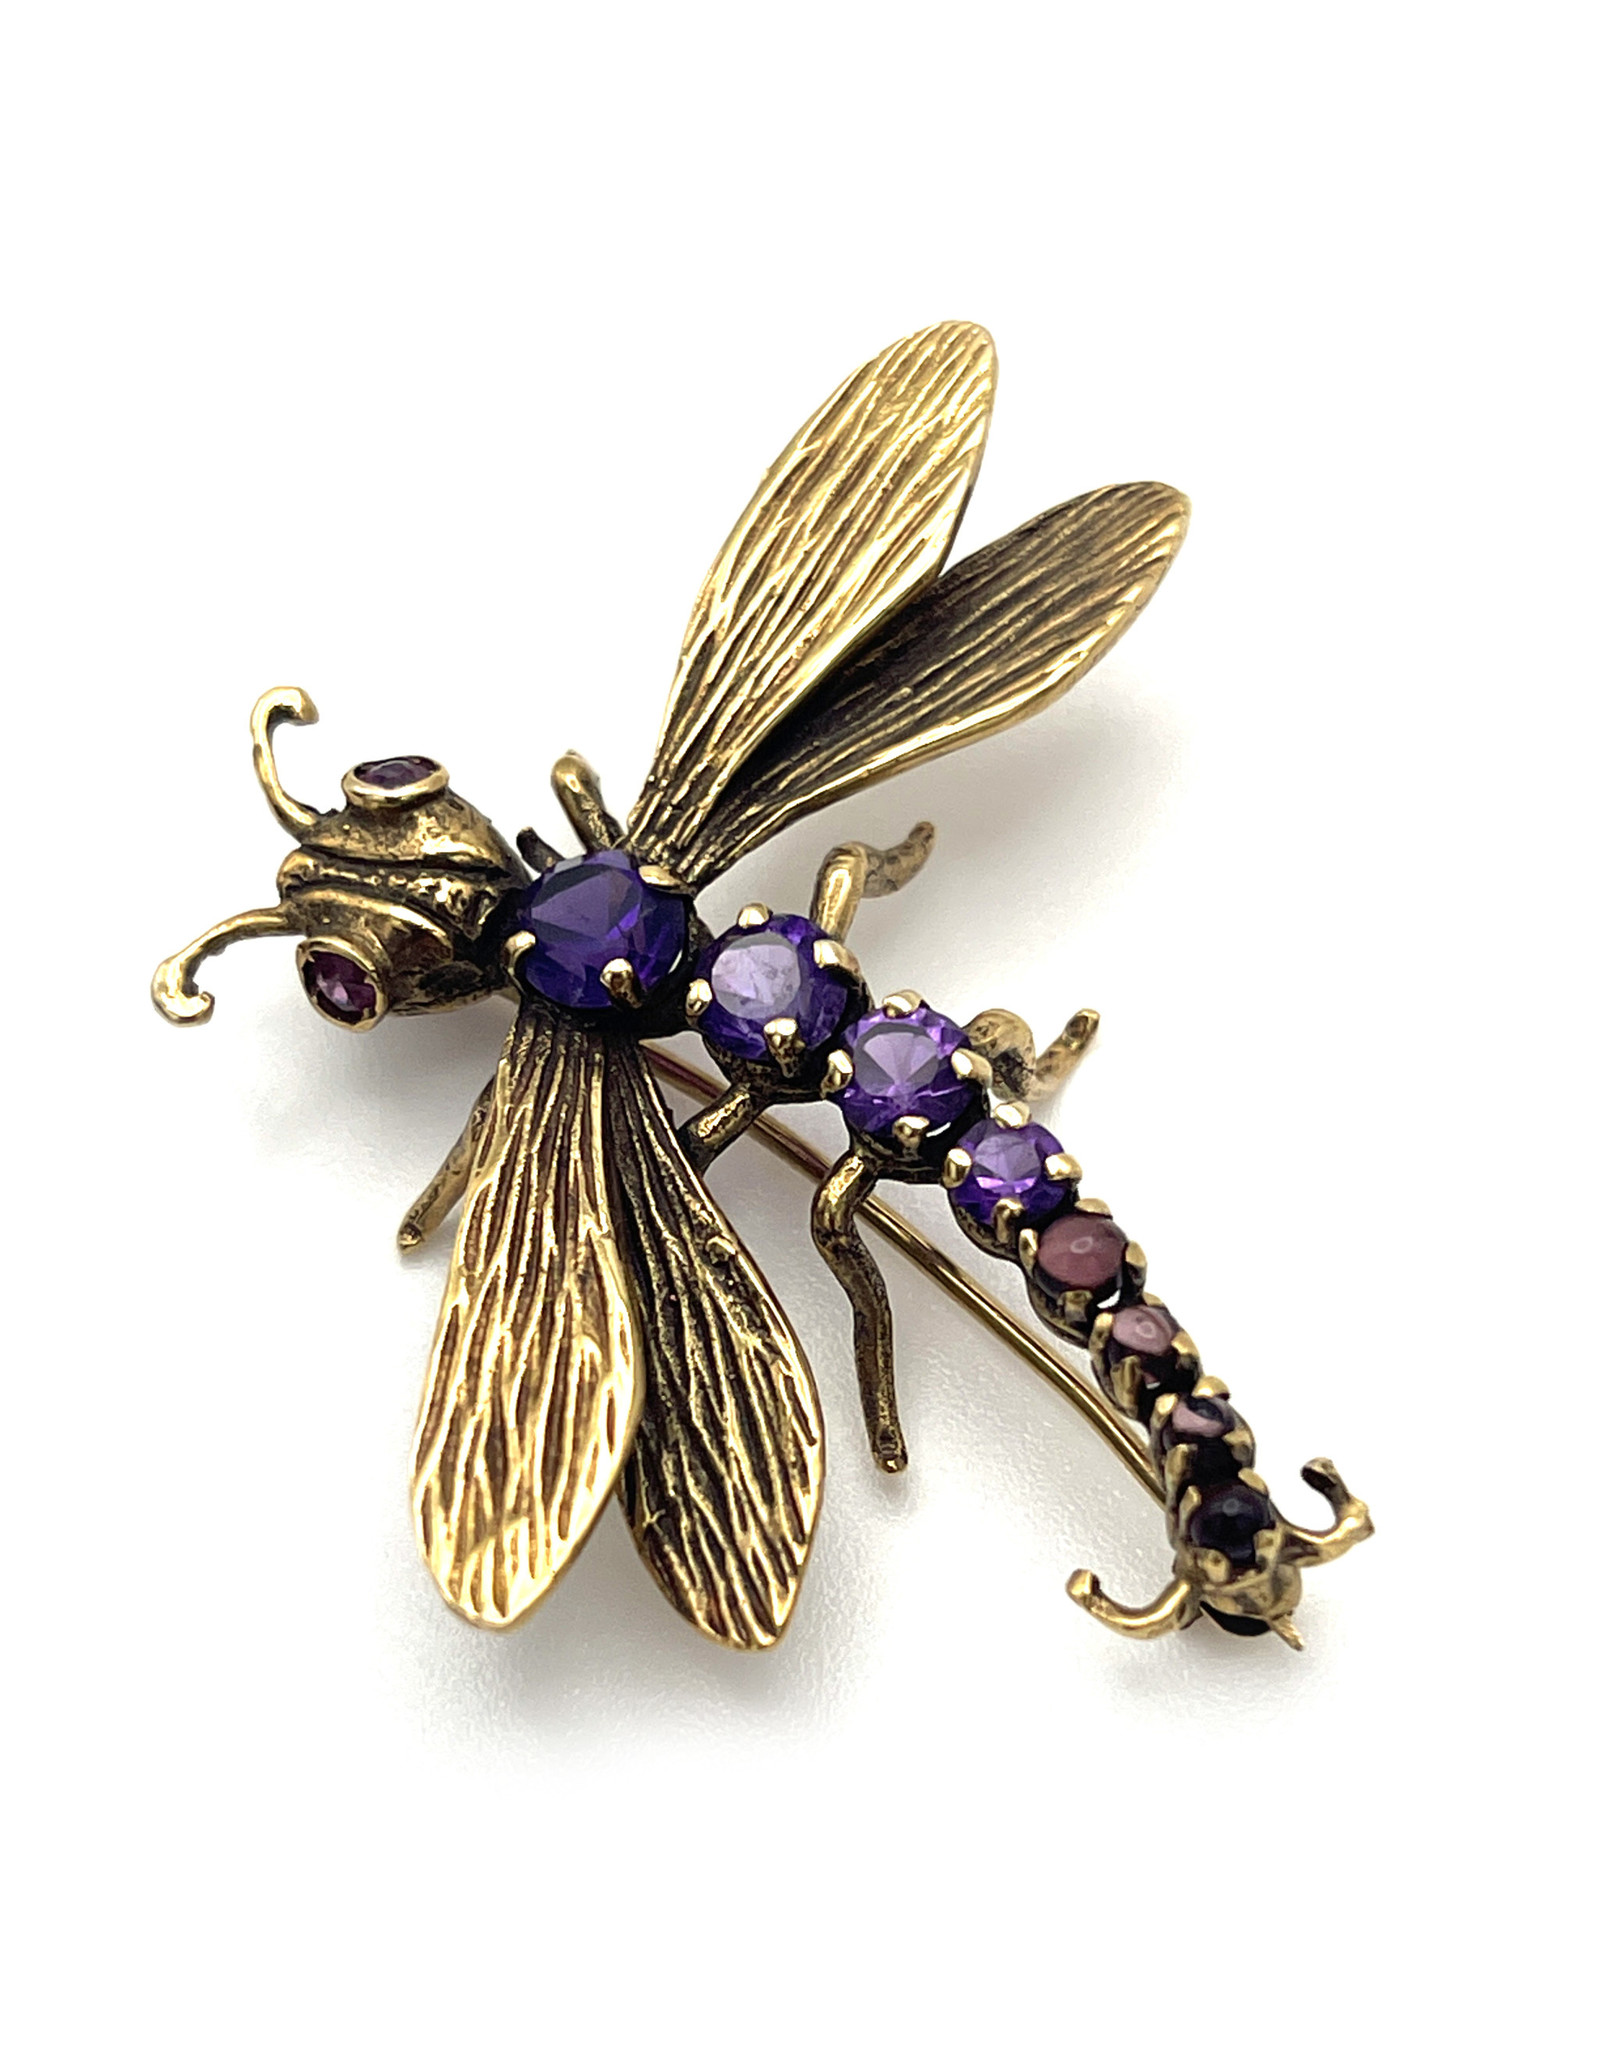 Vintage 14K Gold Dragonfly Brooch with Amethysts and Rubies